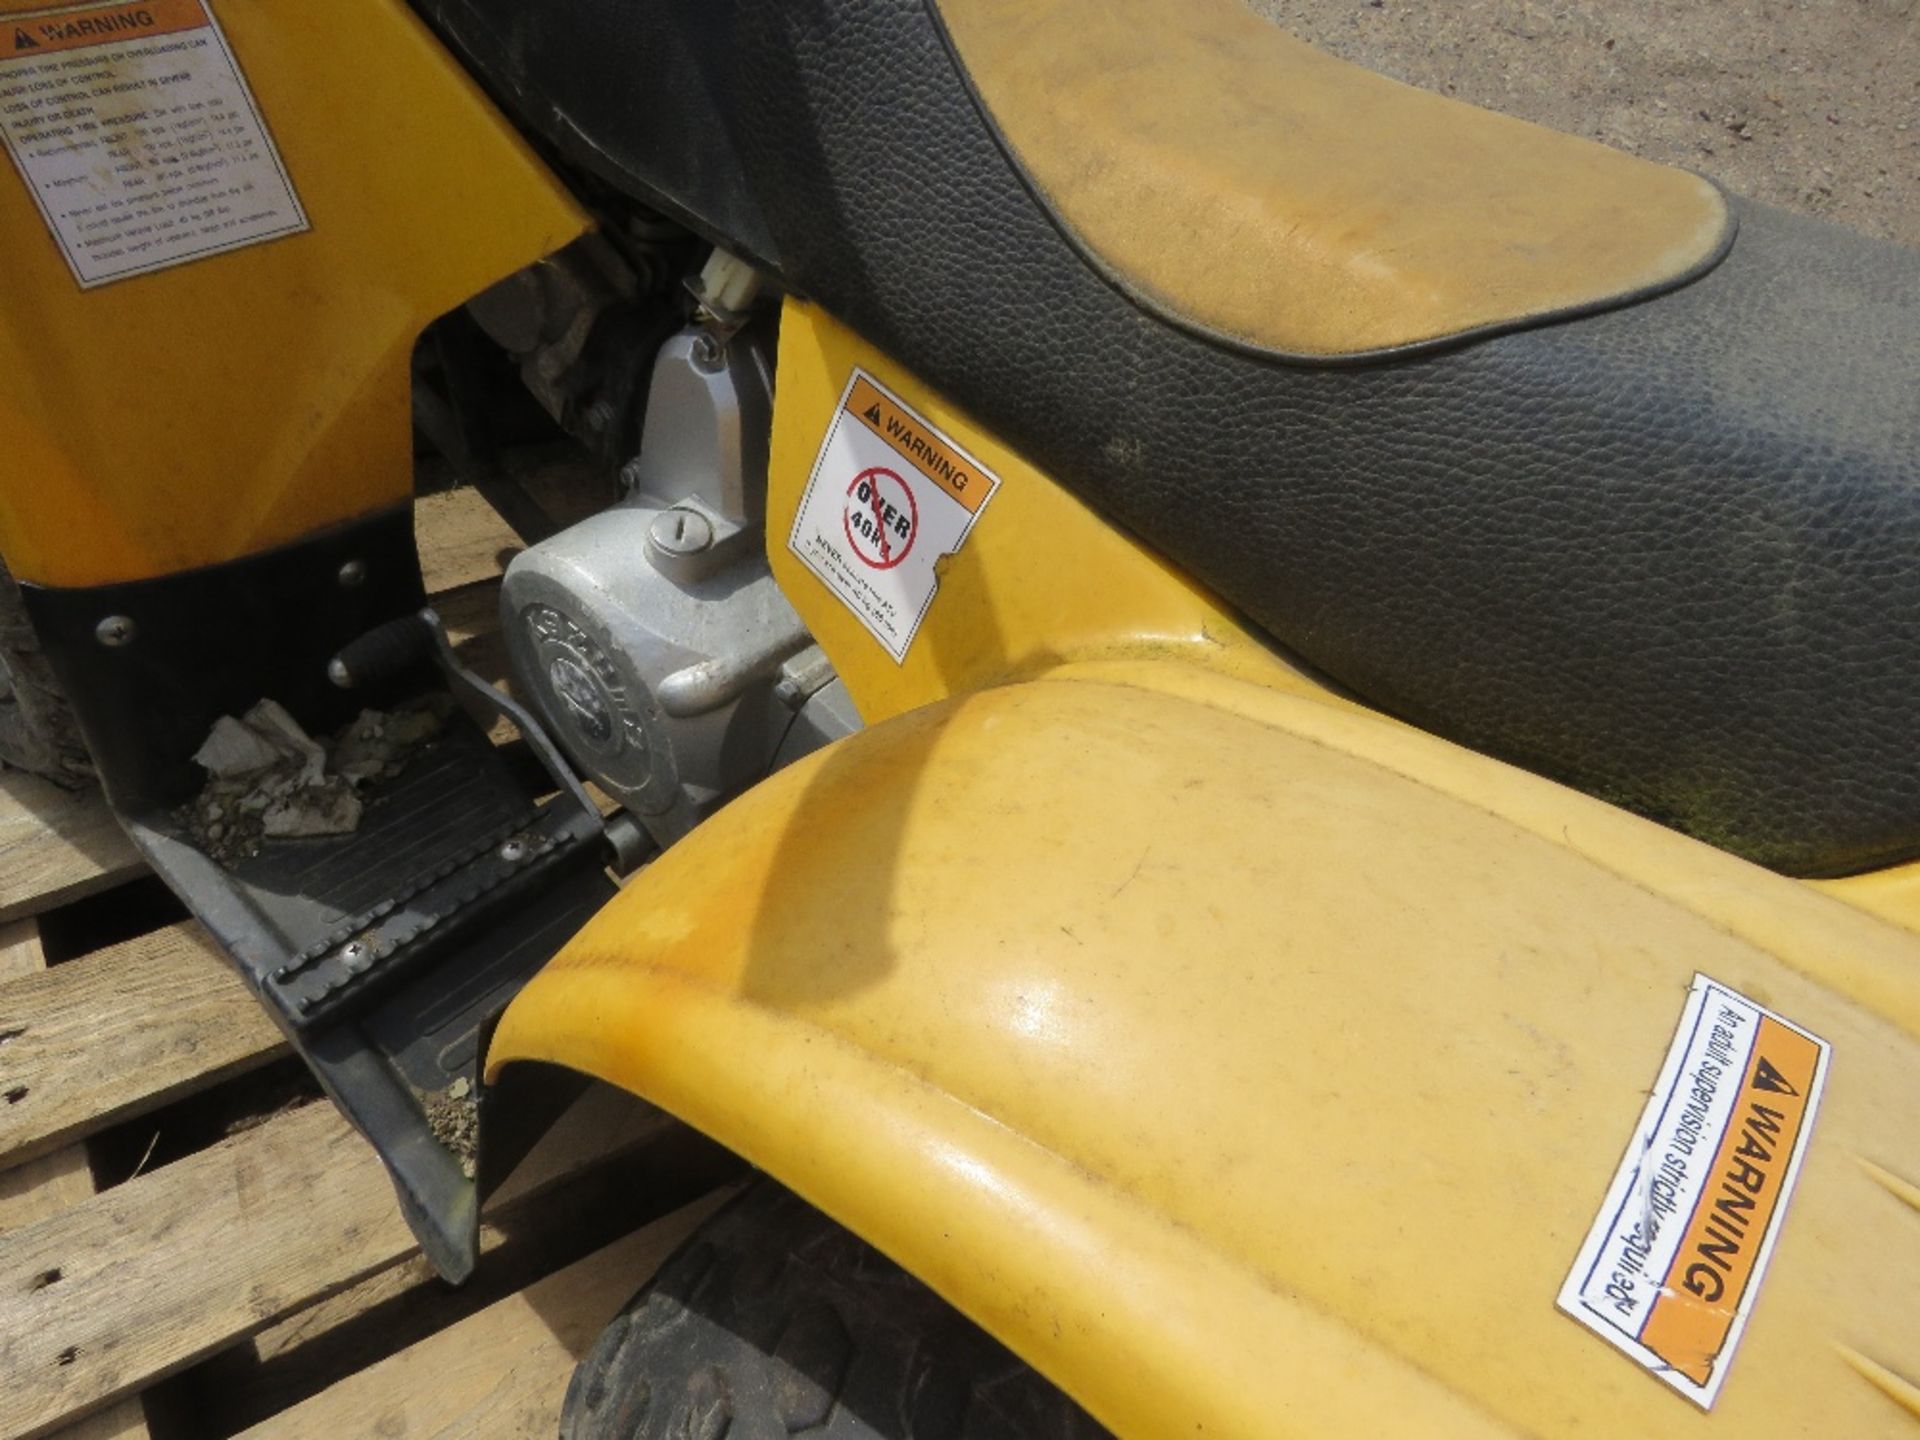 CHILD'S PETROL ENGINED QUAD BIKE, CONDITION UNKNOWN. - Image 3 of 3